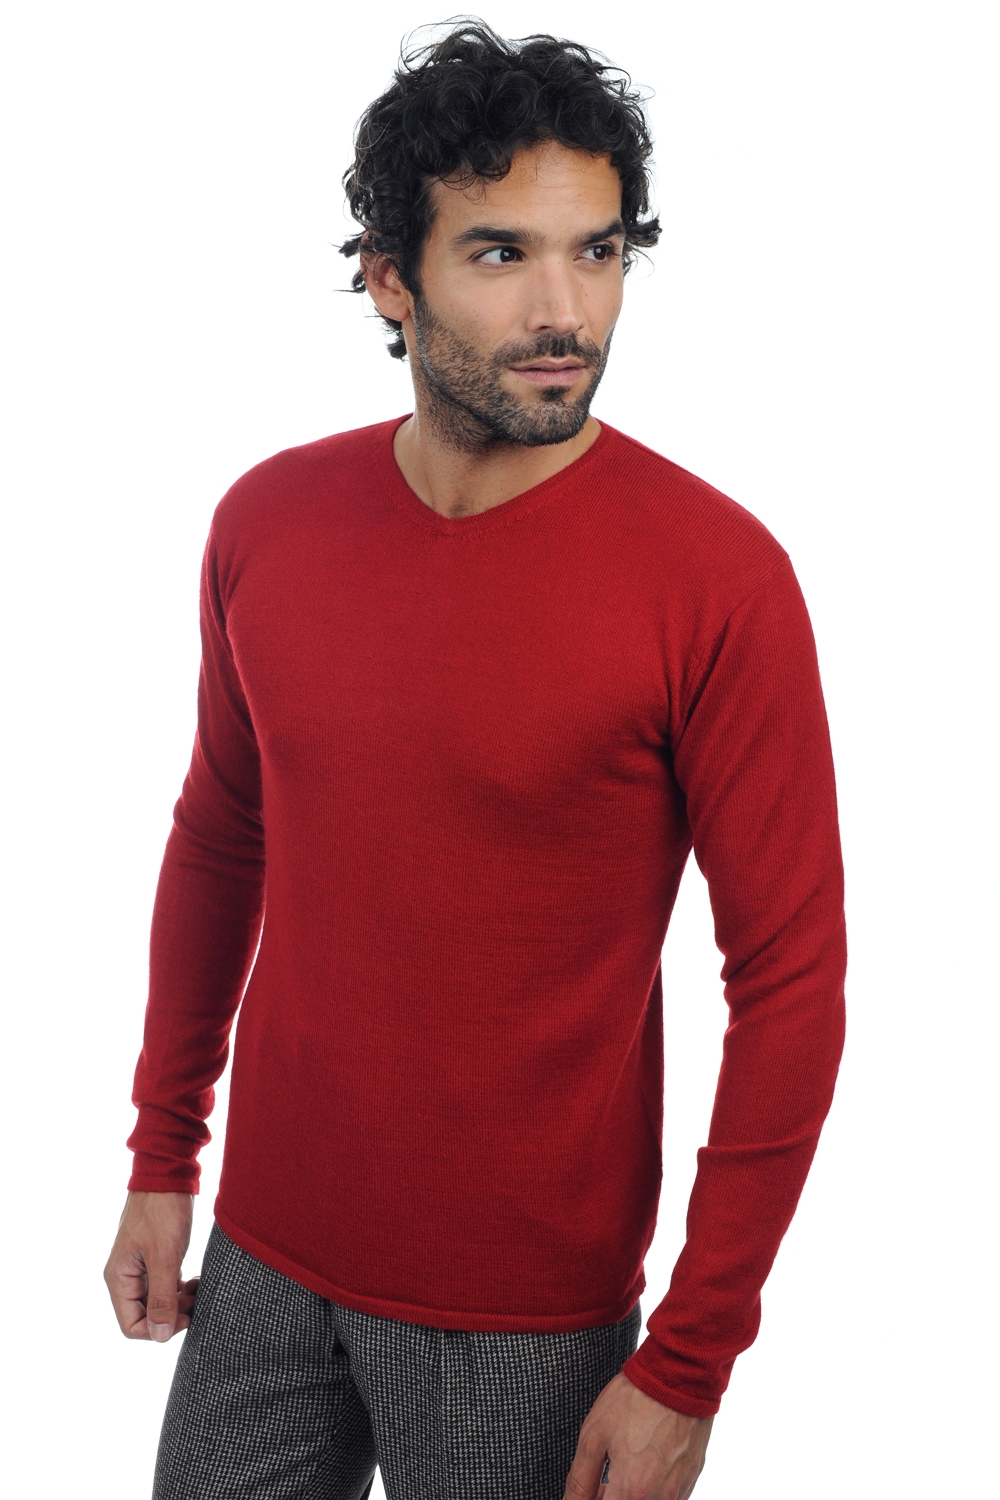 Baby Alpaga pull homme col v ethan rouge l